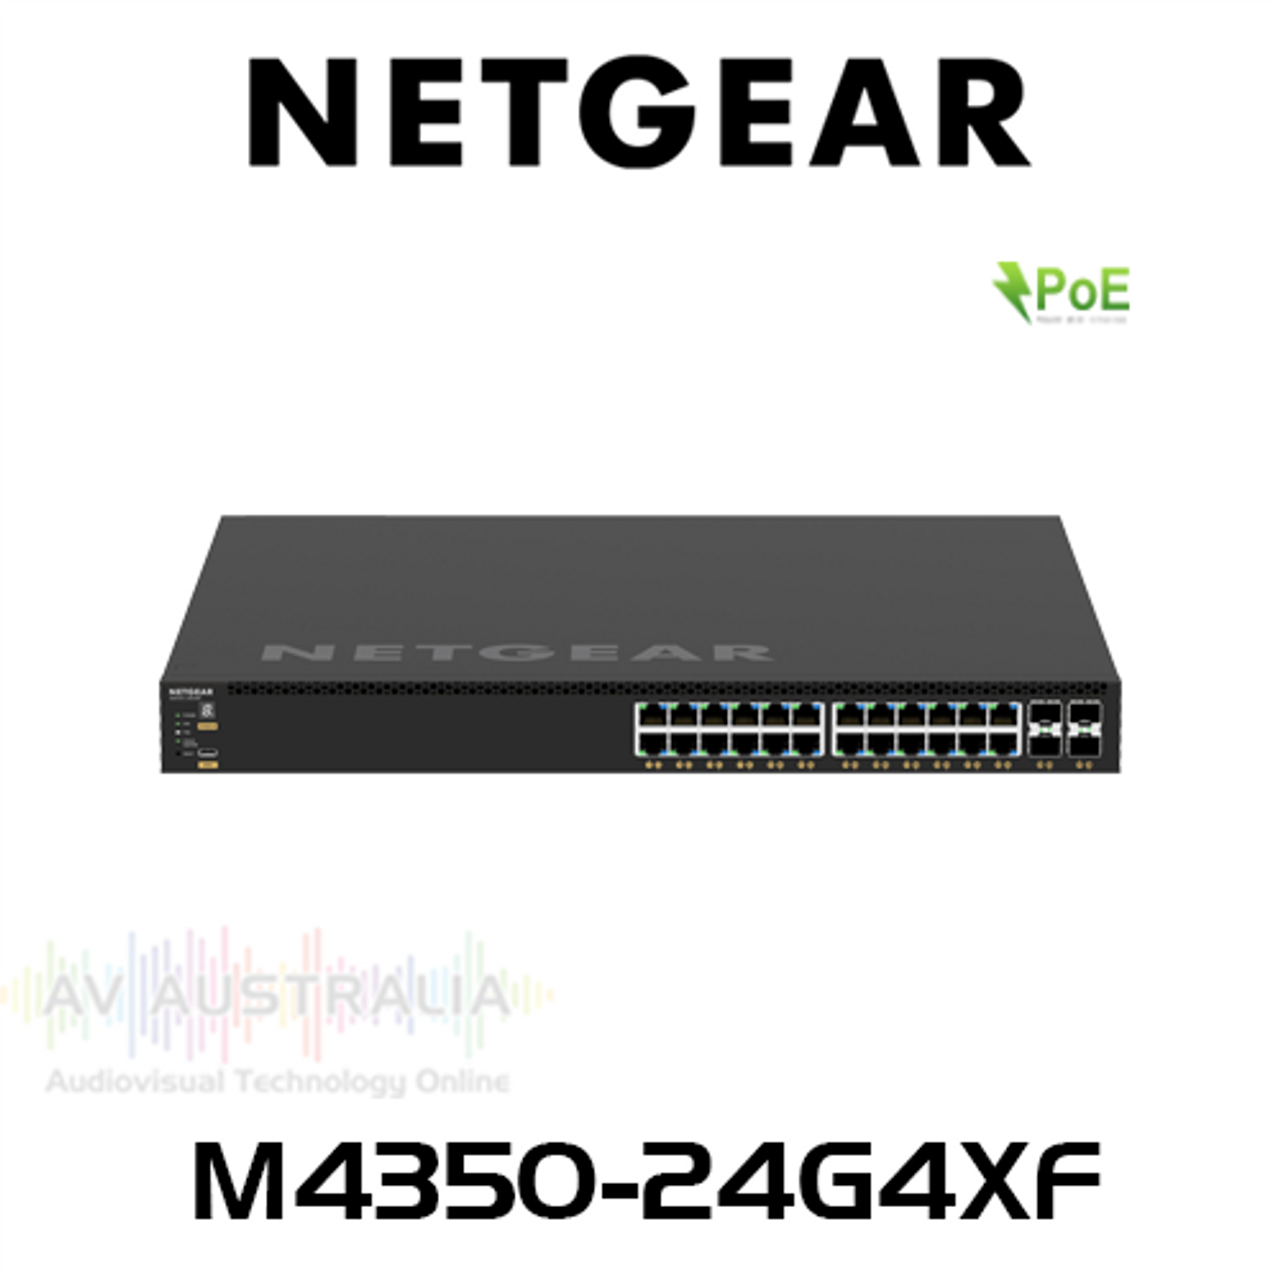 Netgear M4350-24G4XF 24-Port PoE Gigabit Layer 3 Stackable Managed Switch with 4x 10G SFP